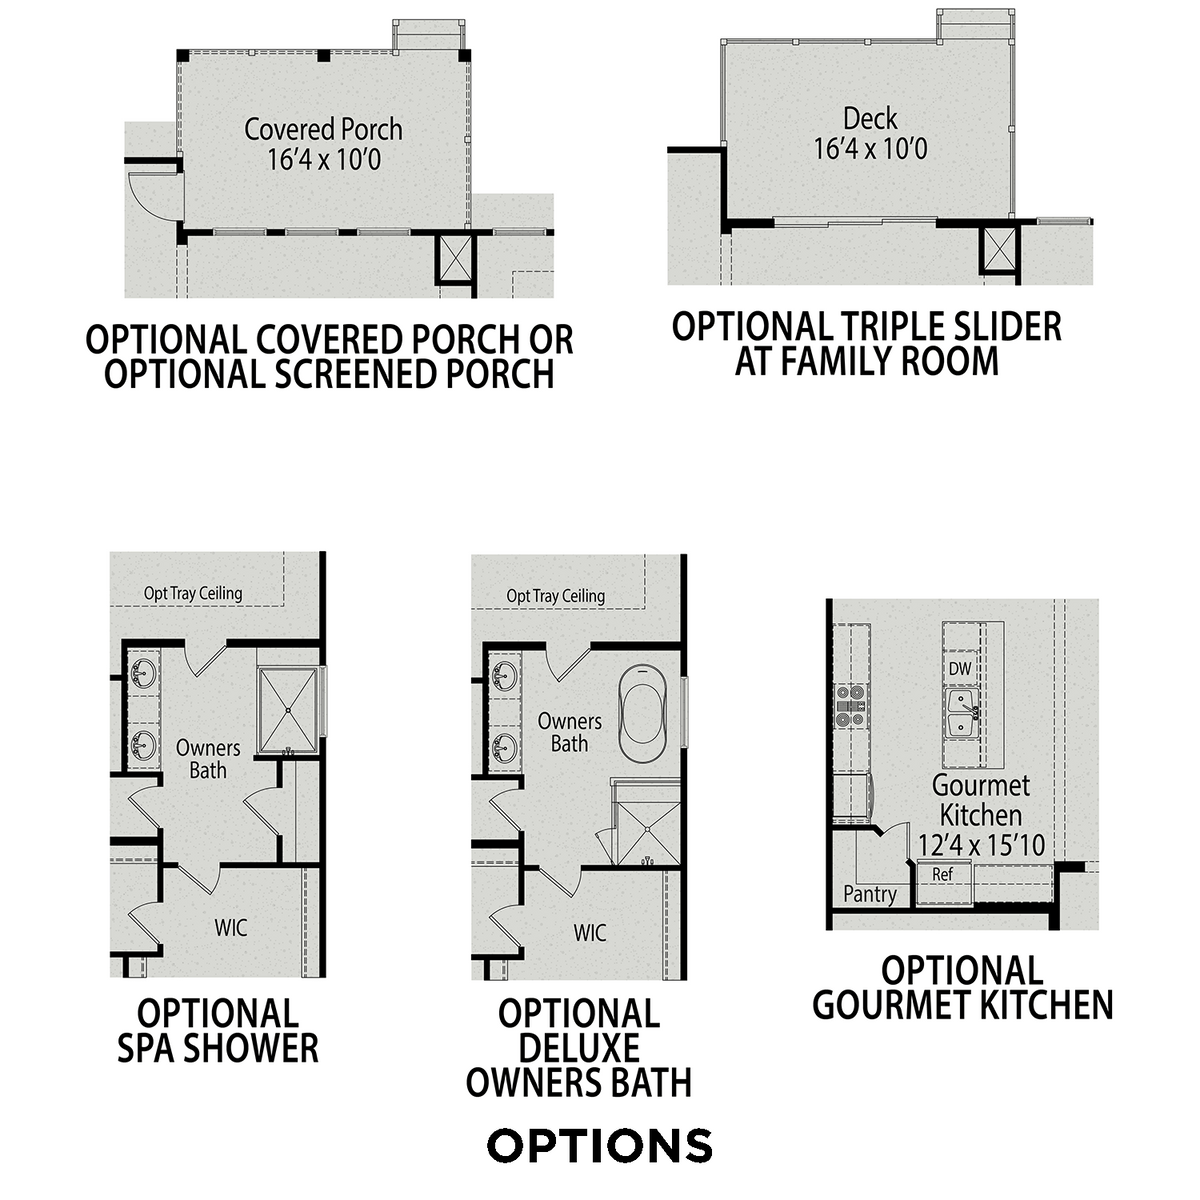 3 - The Cypress A buildable floor plan layout in Davidson Homes' Tobacco Road community.